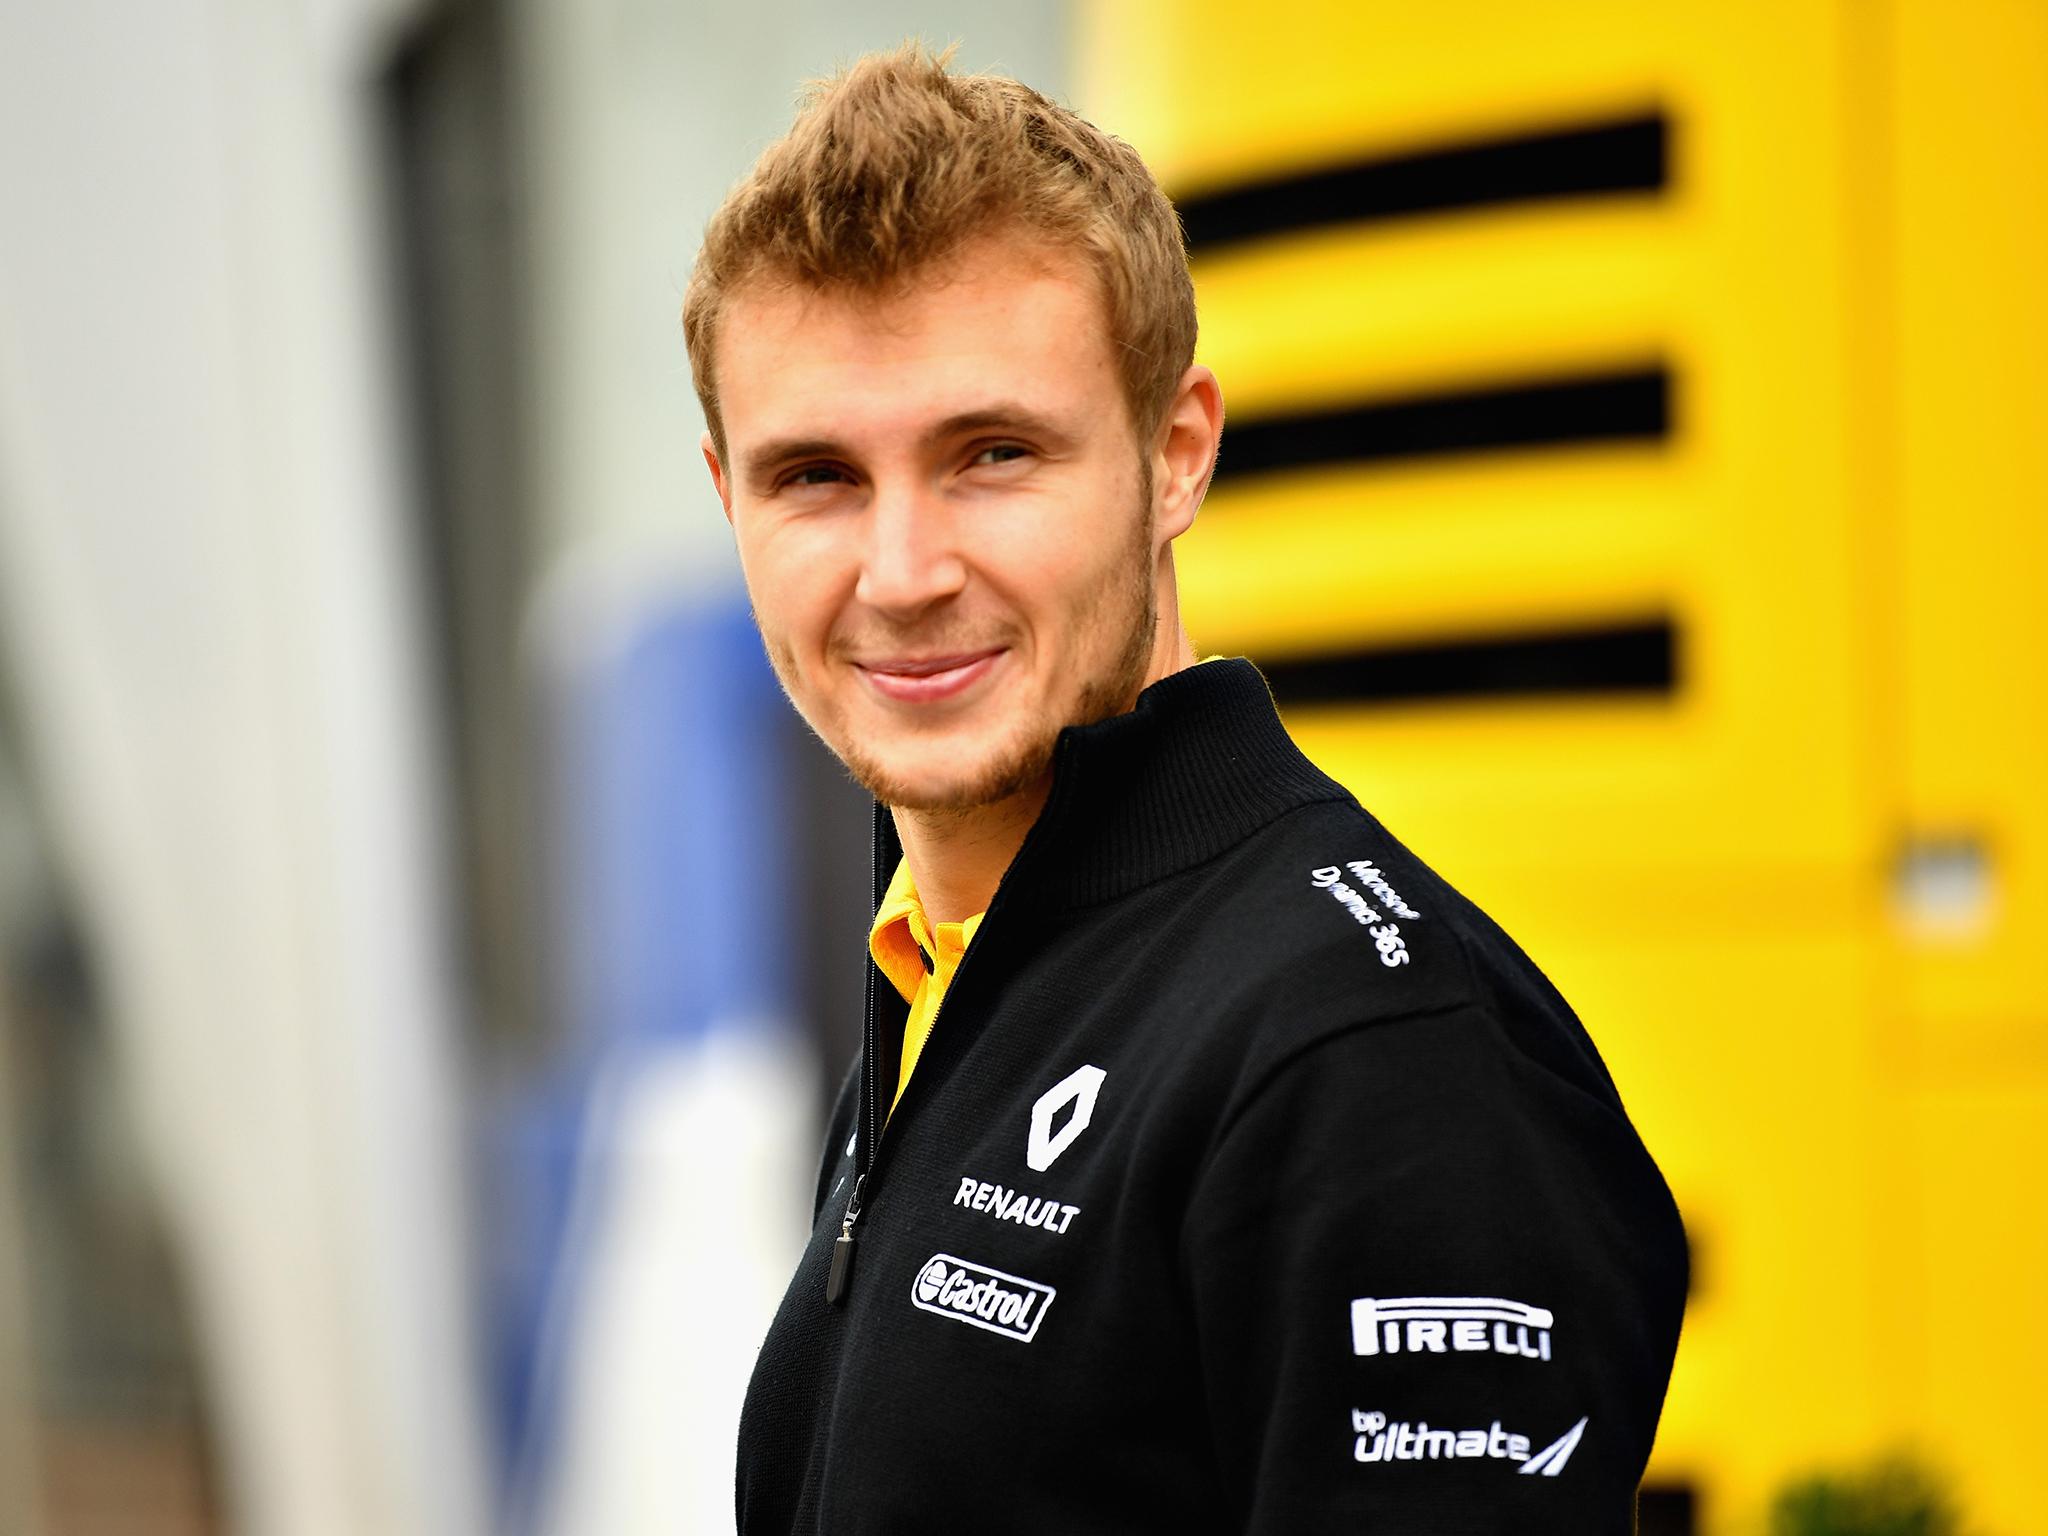 Sergey Sirotkin is the favourite to land the vacant Williams seat for 2018